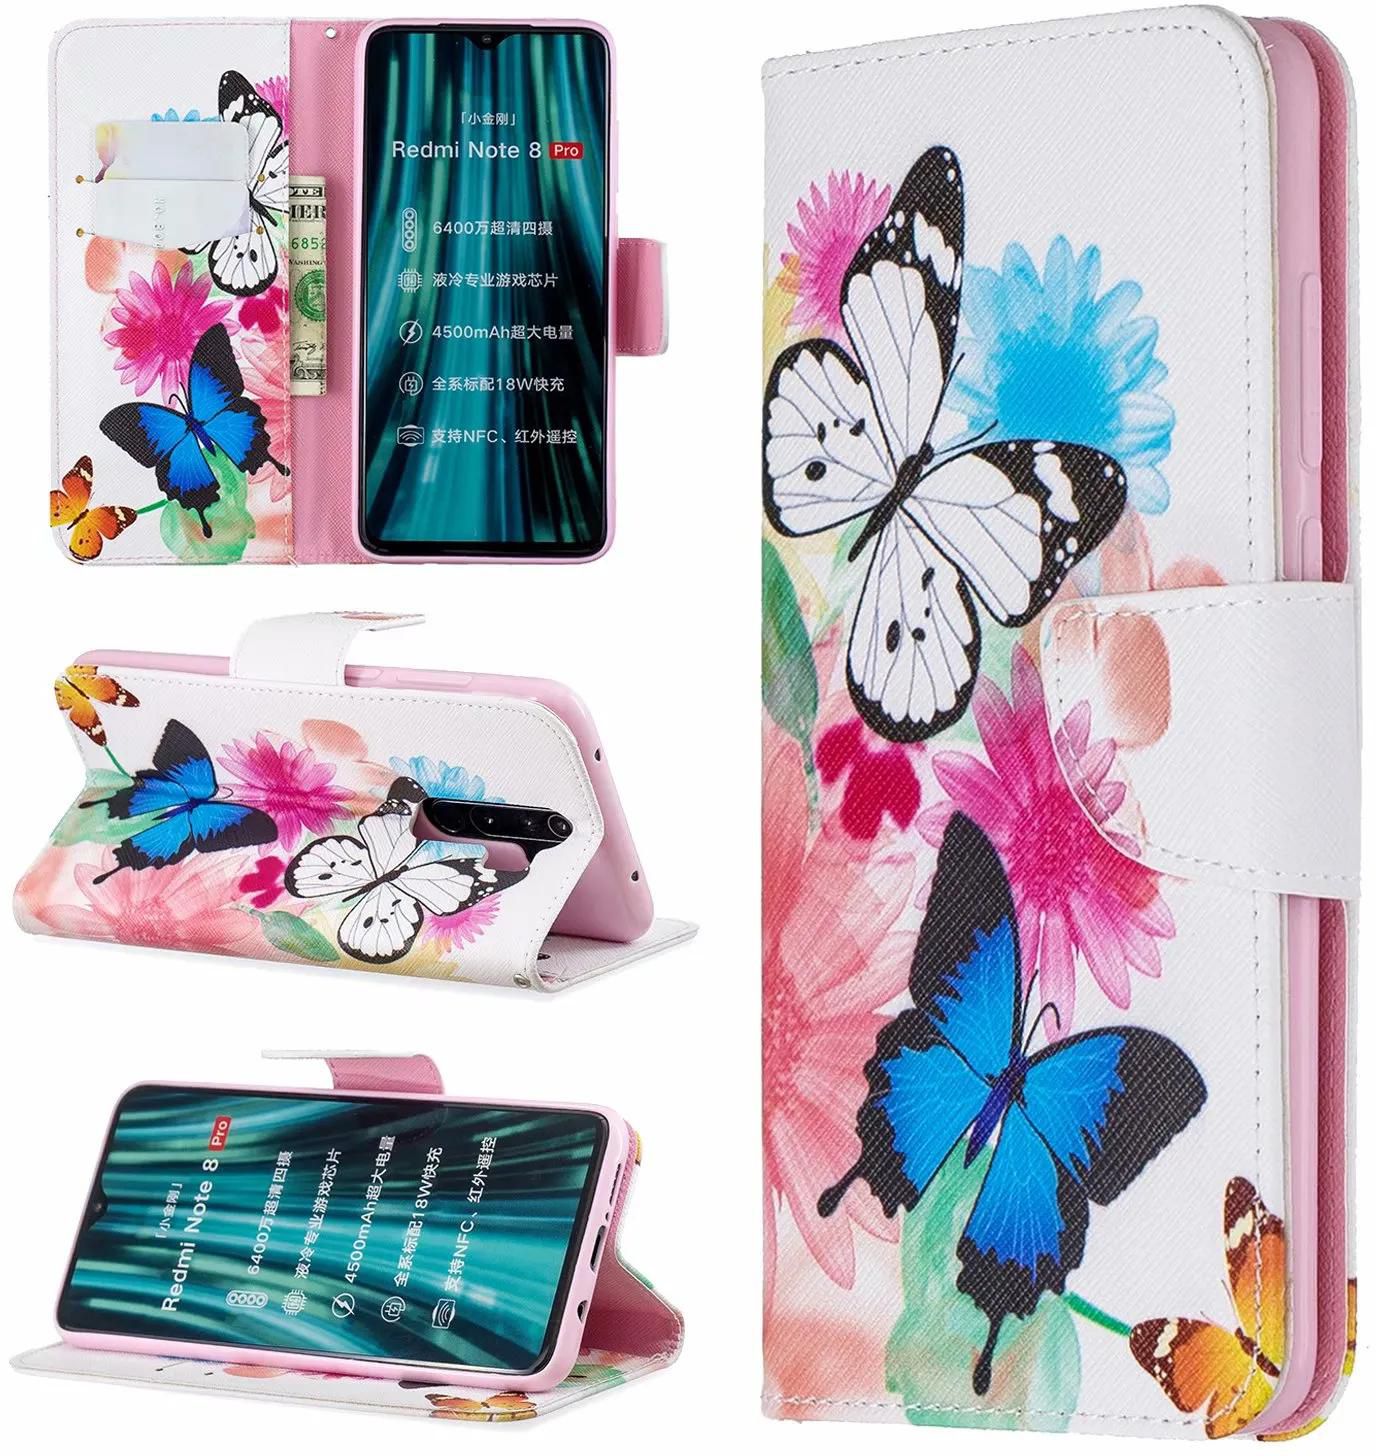 Xiaomi Redmi Note 8 Pro Case, Flip Wallet Phone Cover for Redmi Note 8 Pro - Flower Butterfly